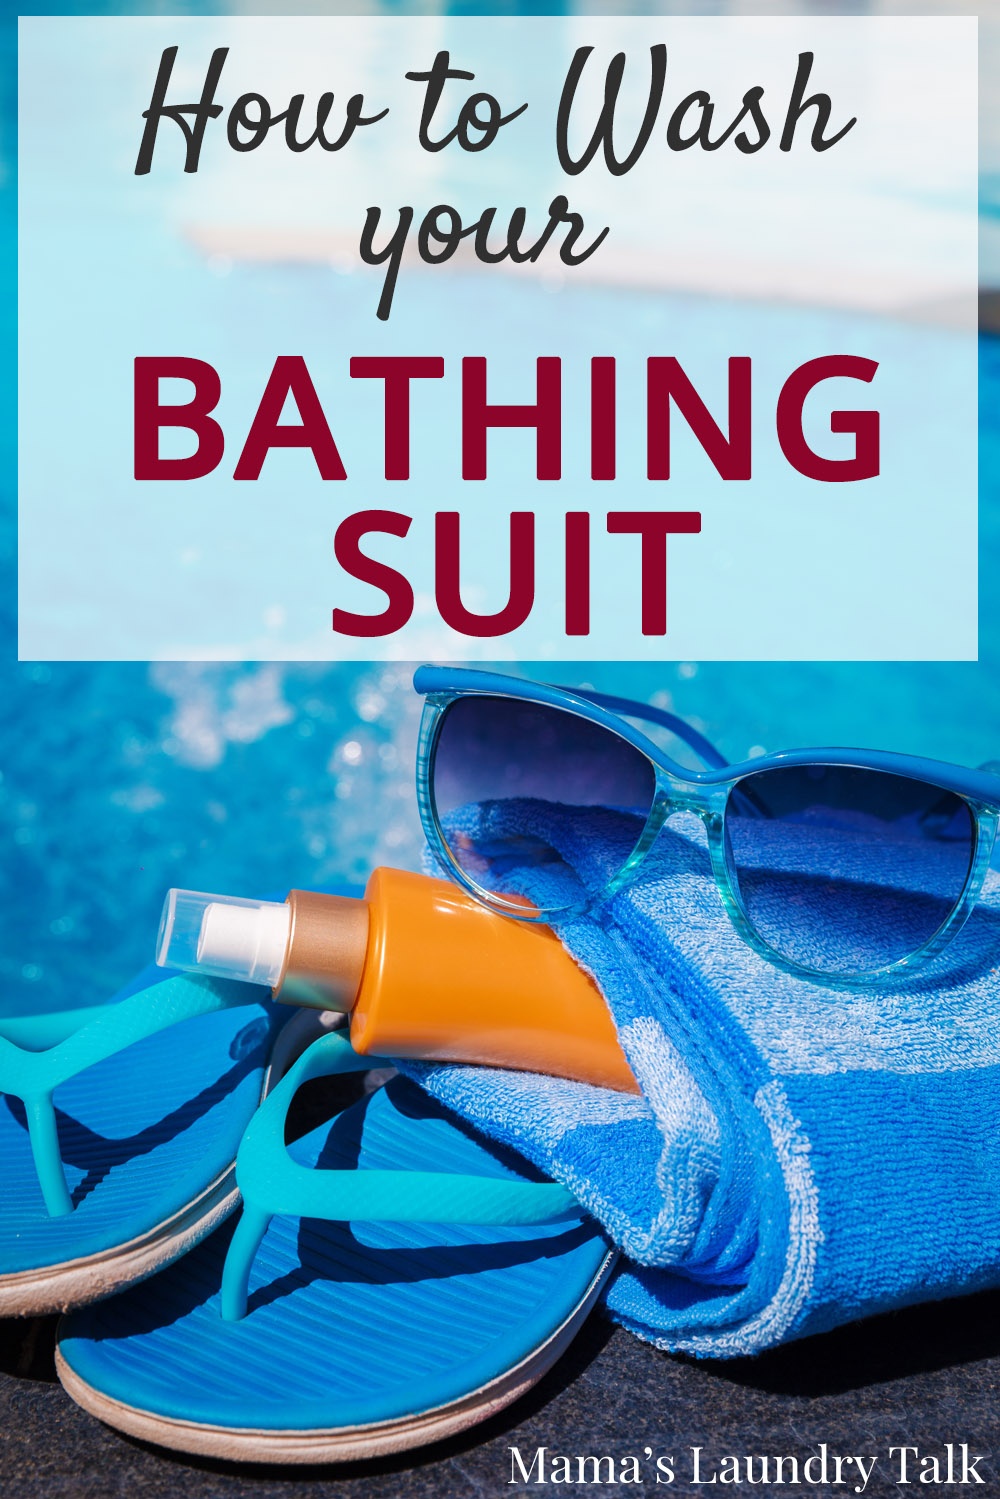 How To Wash Your Bathing Suits, Because You Need Them To Last You